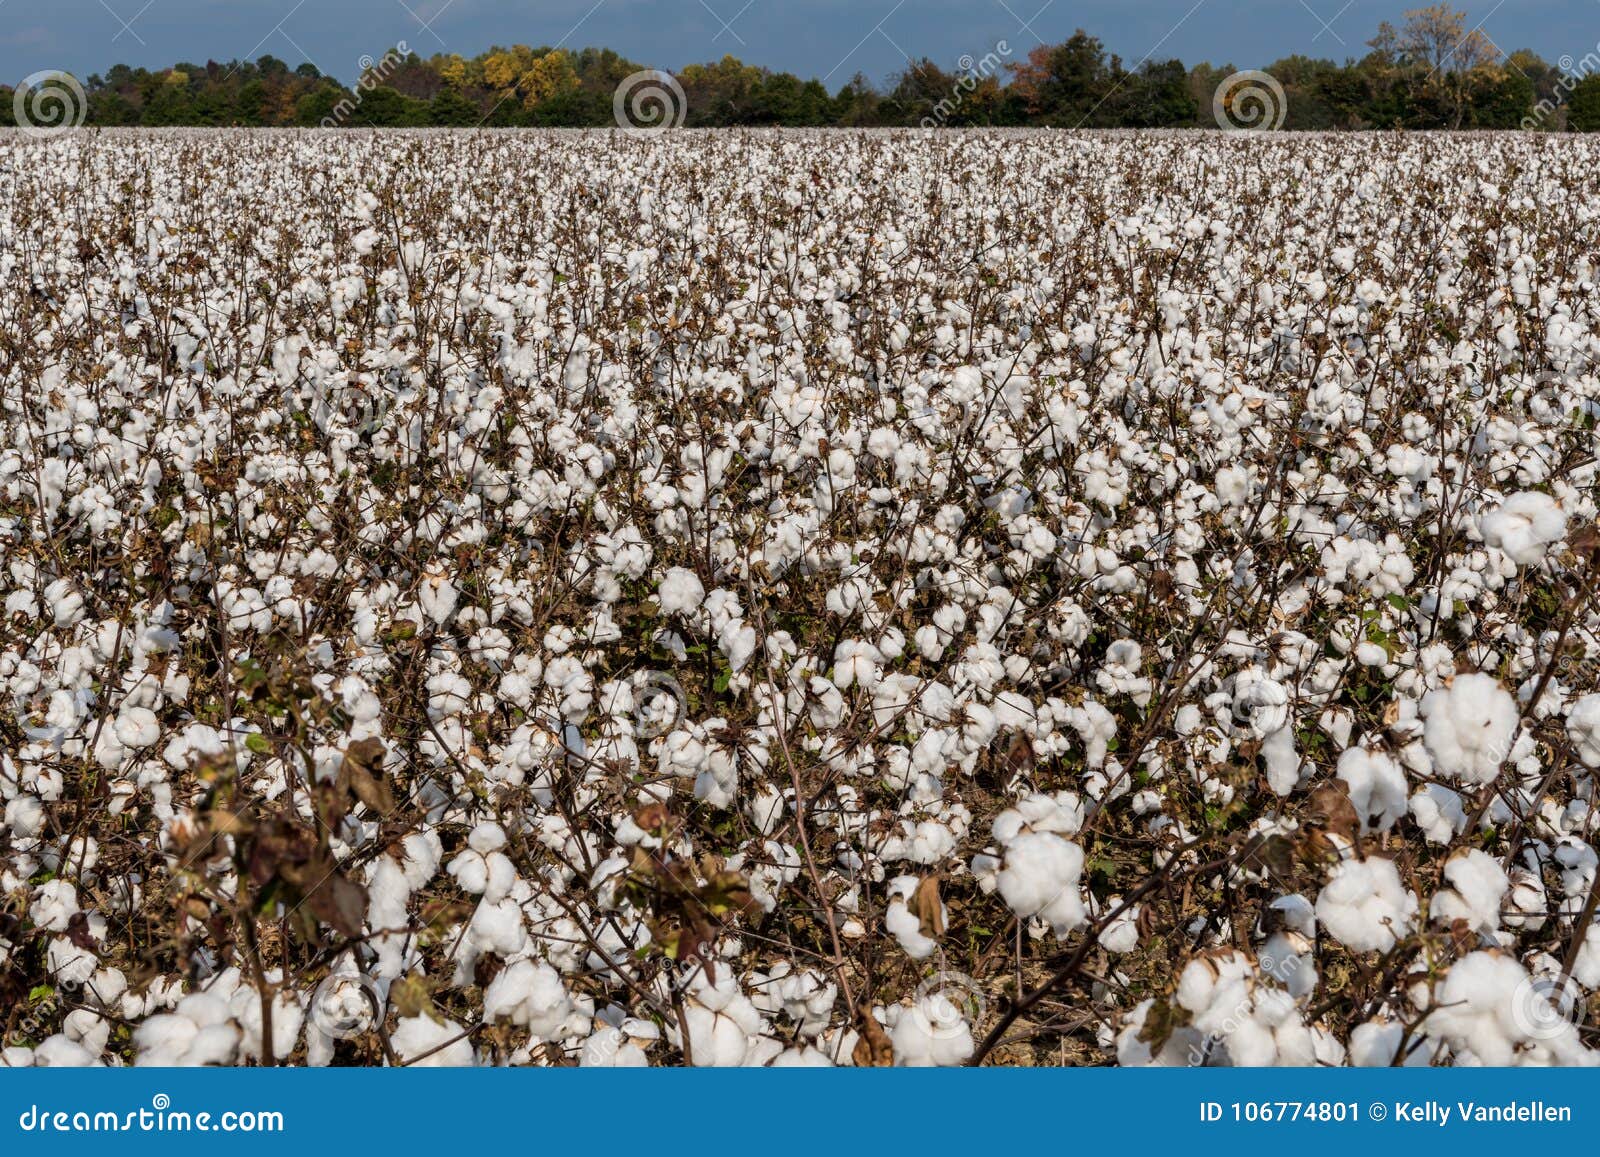 Cotton Field In Full Bloom Stock Photo, Picture and Royalty Free